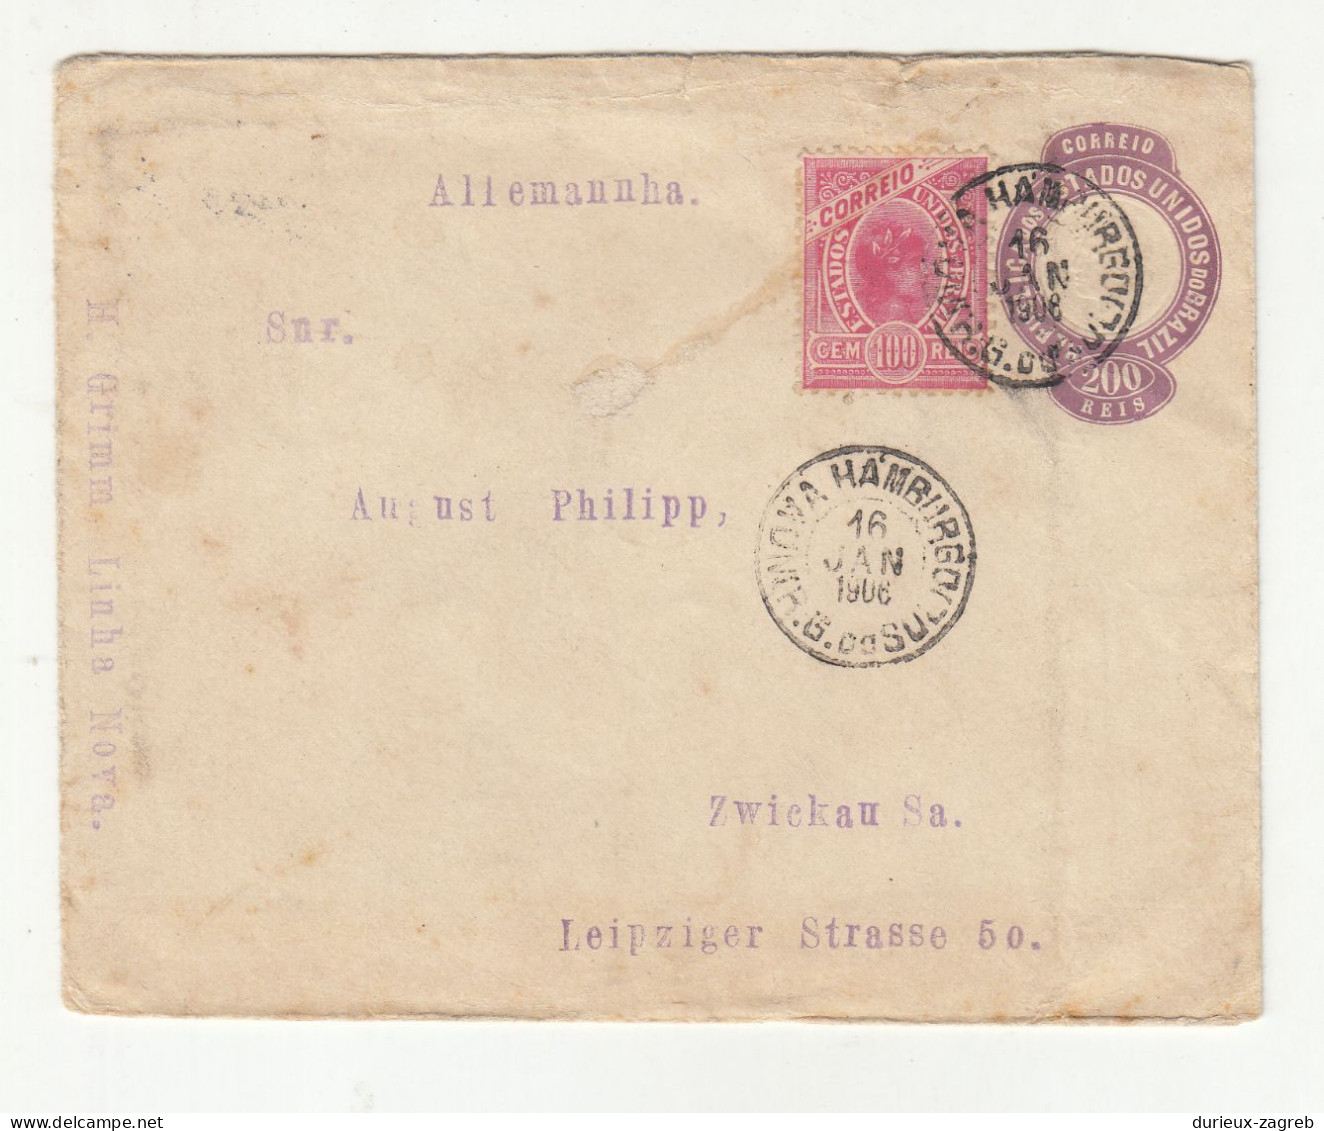 Brazil 200 Reis Postal Stationery Letter Cover Posted 1906 To Germany - Uprated B240401 - Enteros Postales